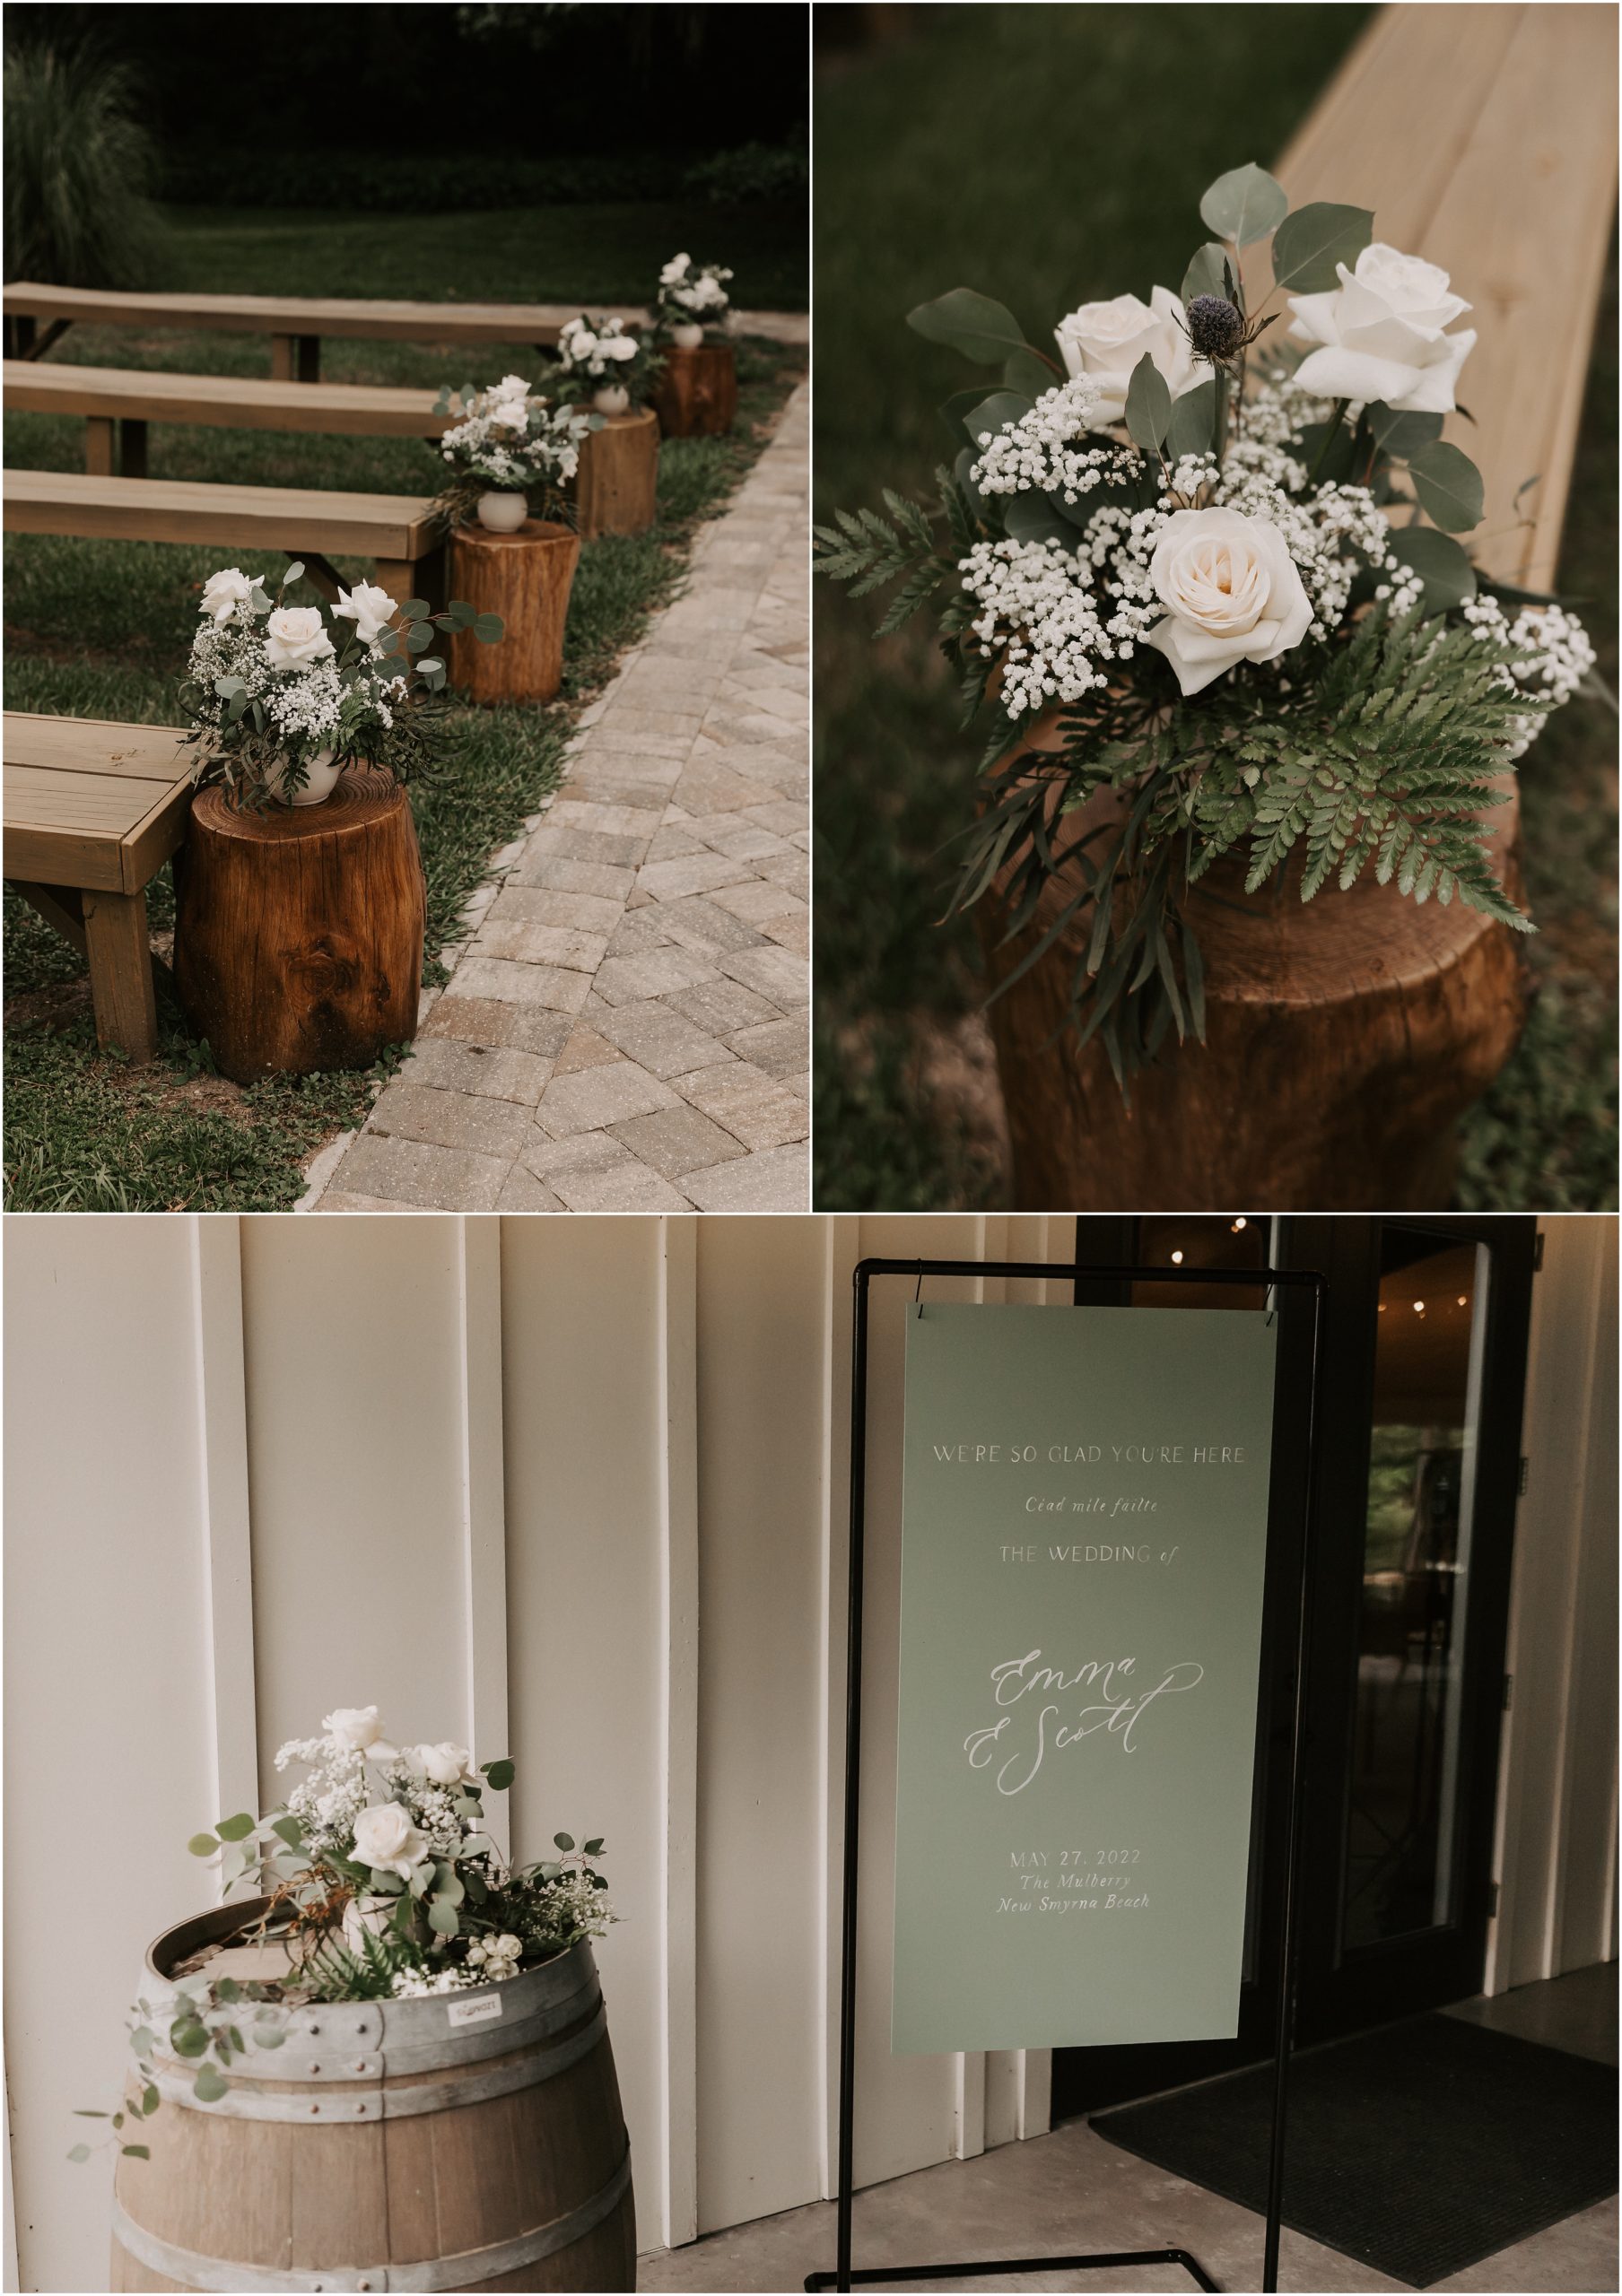 The beautiful flowers arrangements for their intimate celebration and the reception were provided by one of Meche Ausina Photography's sister companies, Florece. 